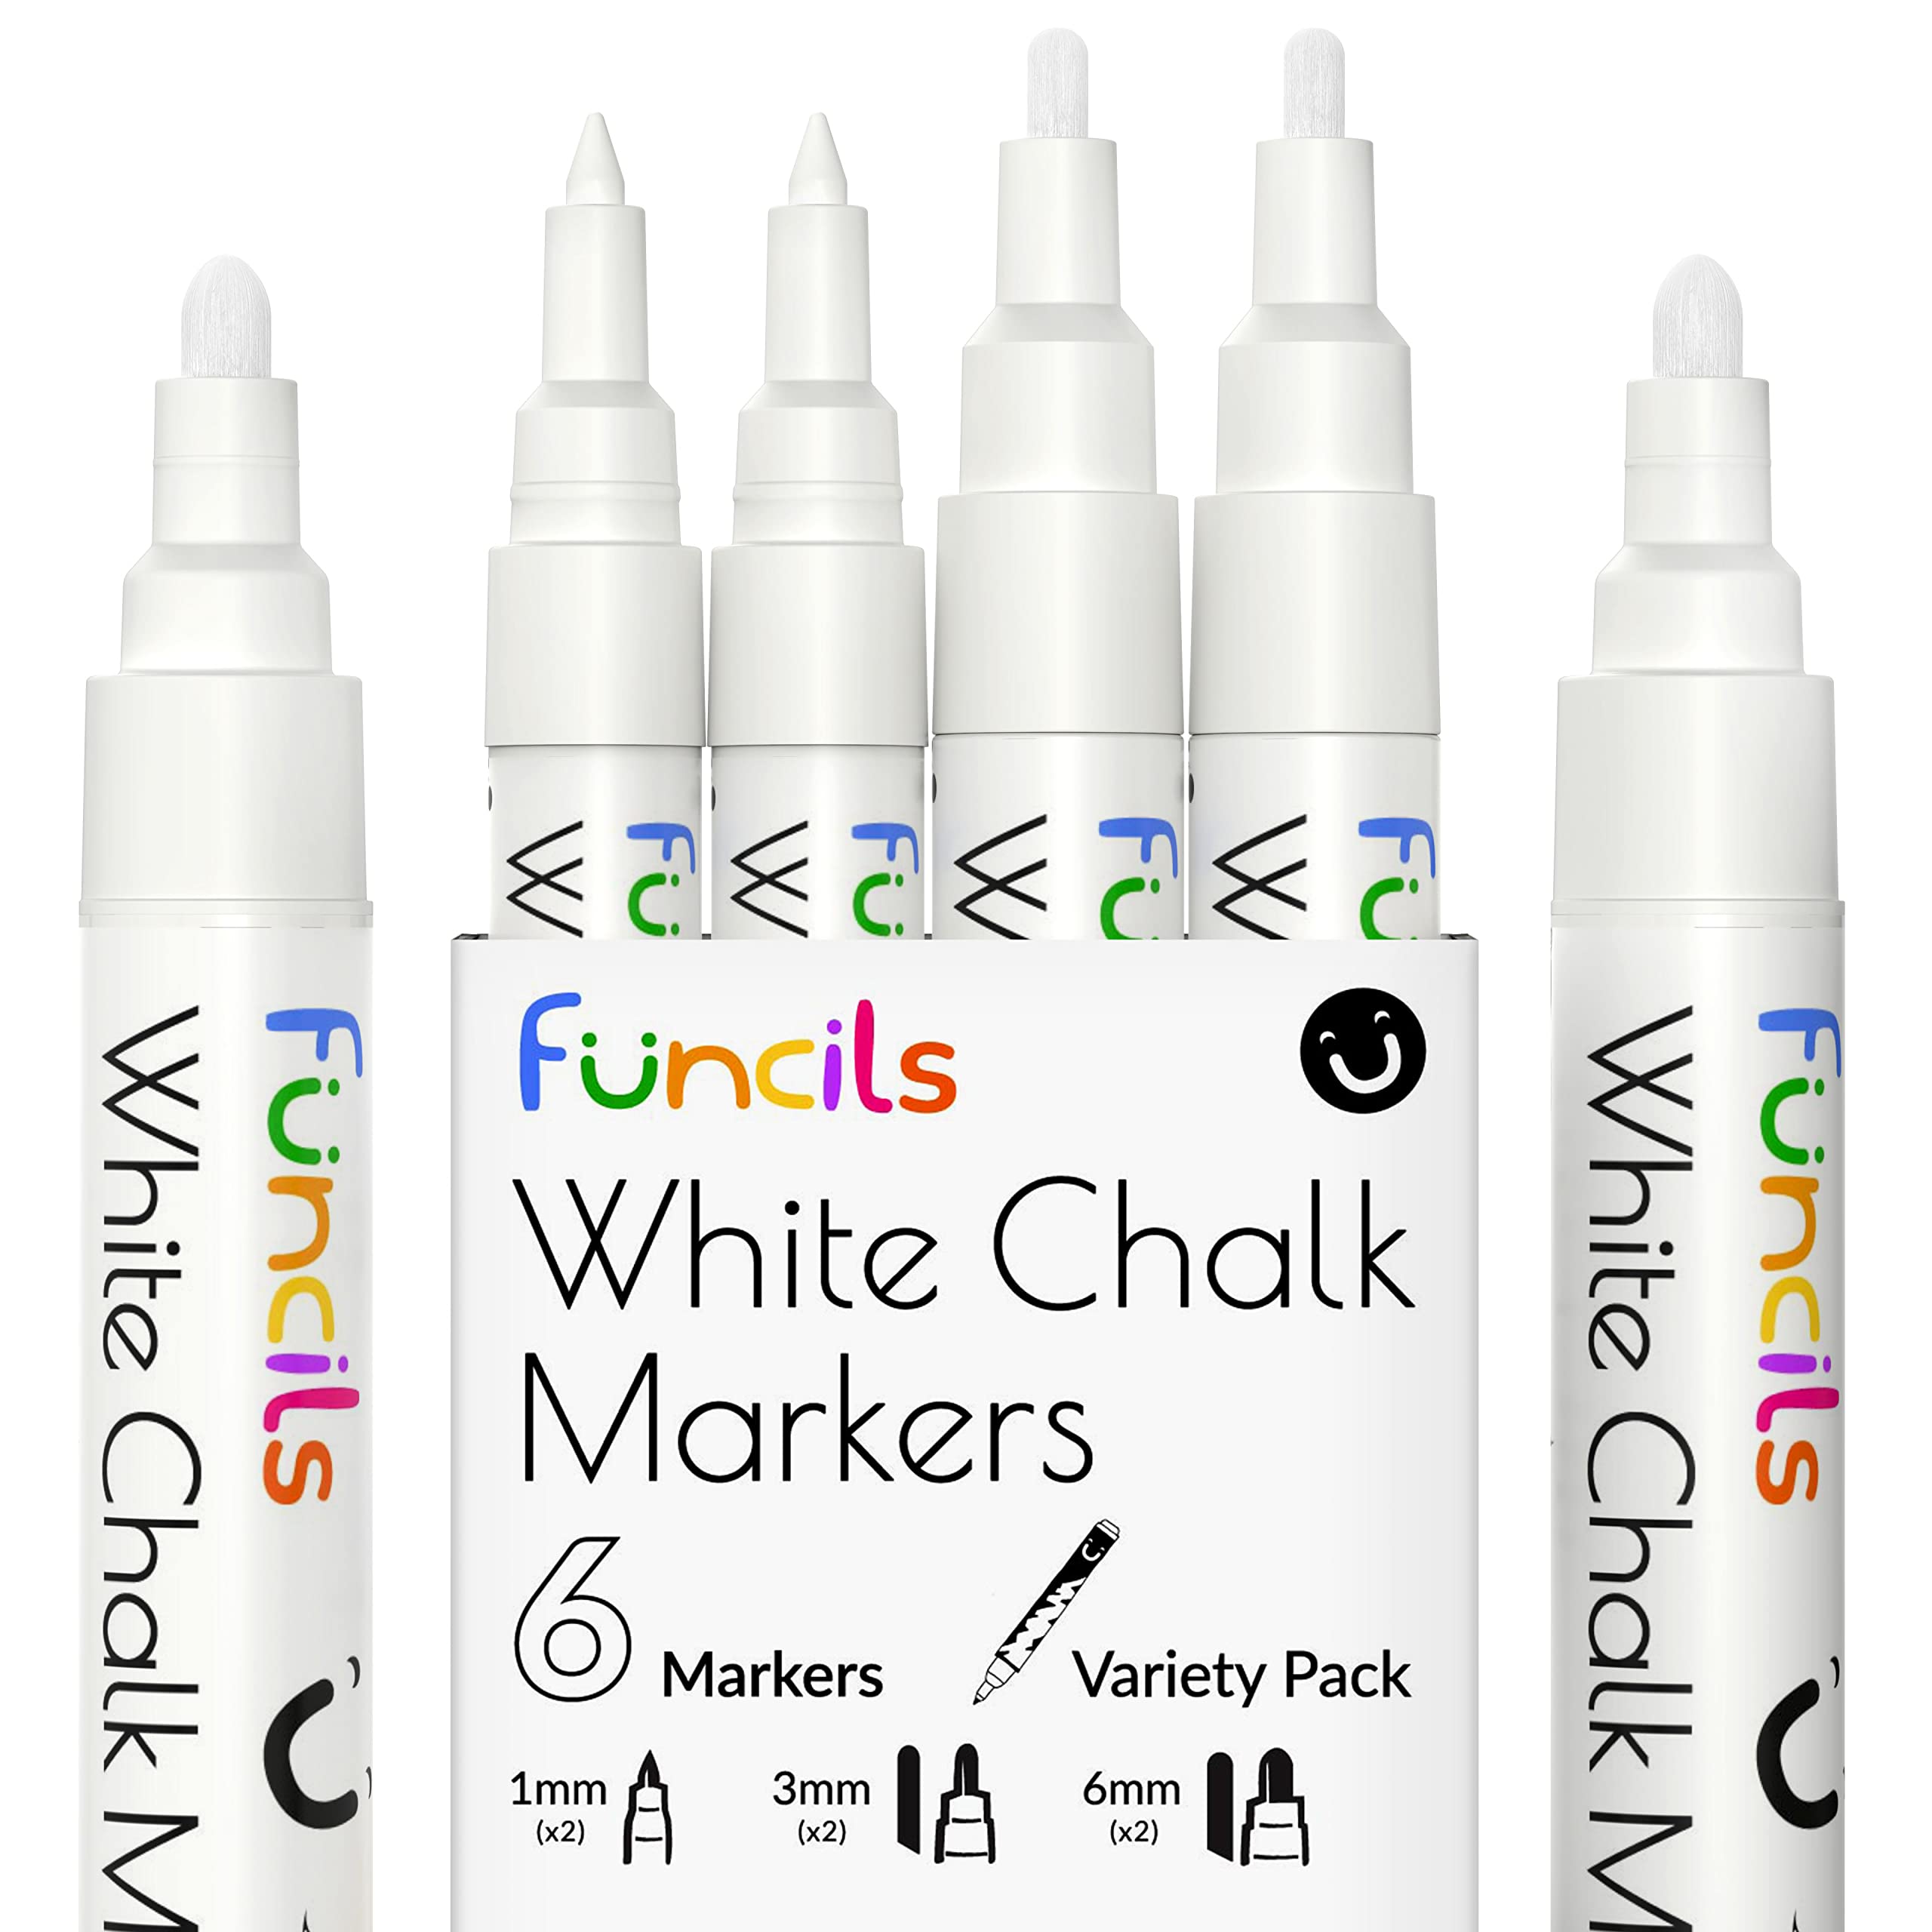 Funcils White Chalk Markers for Chalkboard Signs, Blackboard, Window,  Labels, Bistro, Glass, Cars - Variety Pack of 6 - (2x) 1mm Extra Fine, 3mm  Fine Tip & 6mm Bold Tip